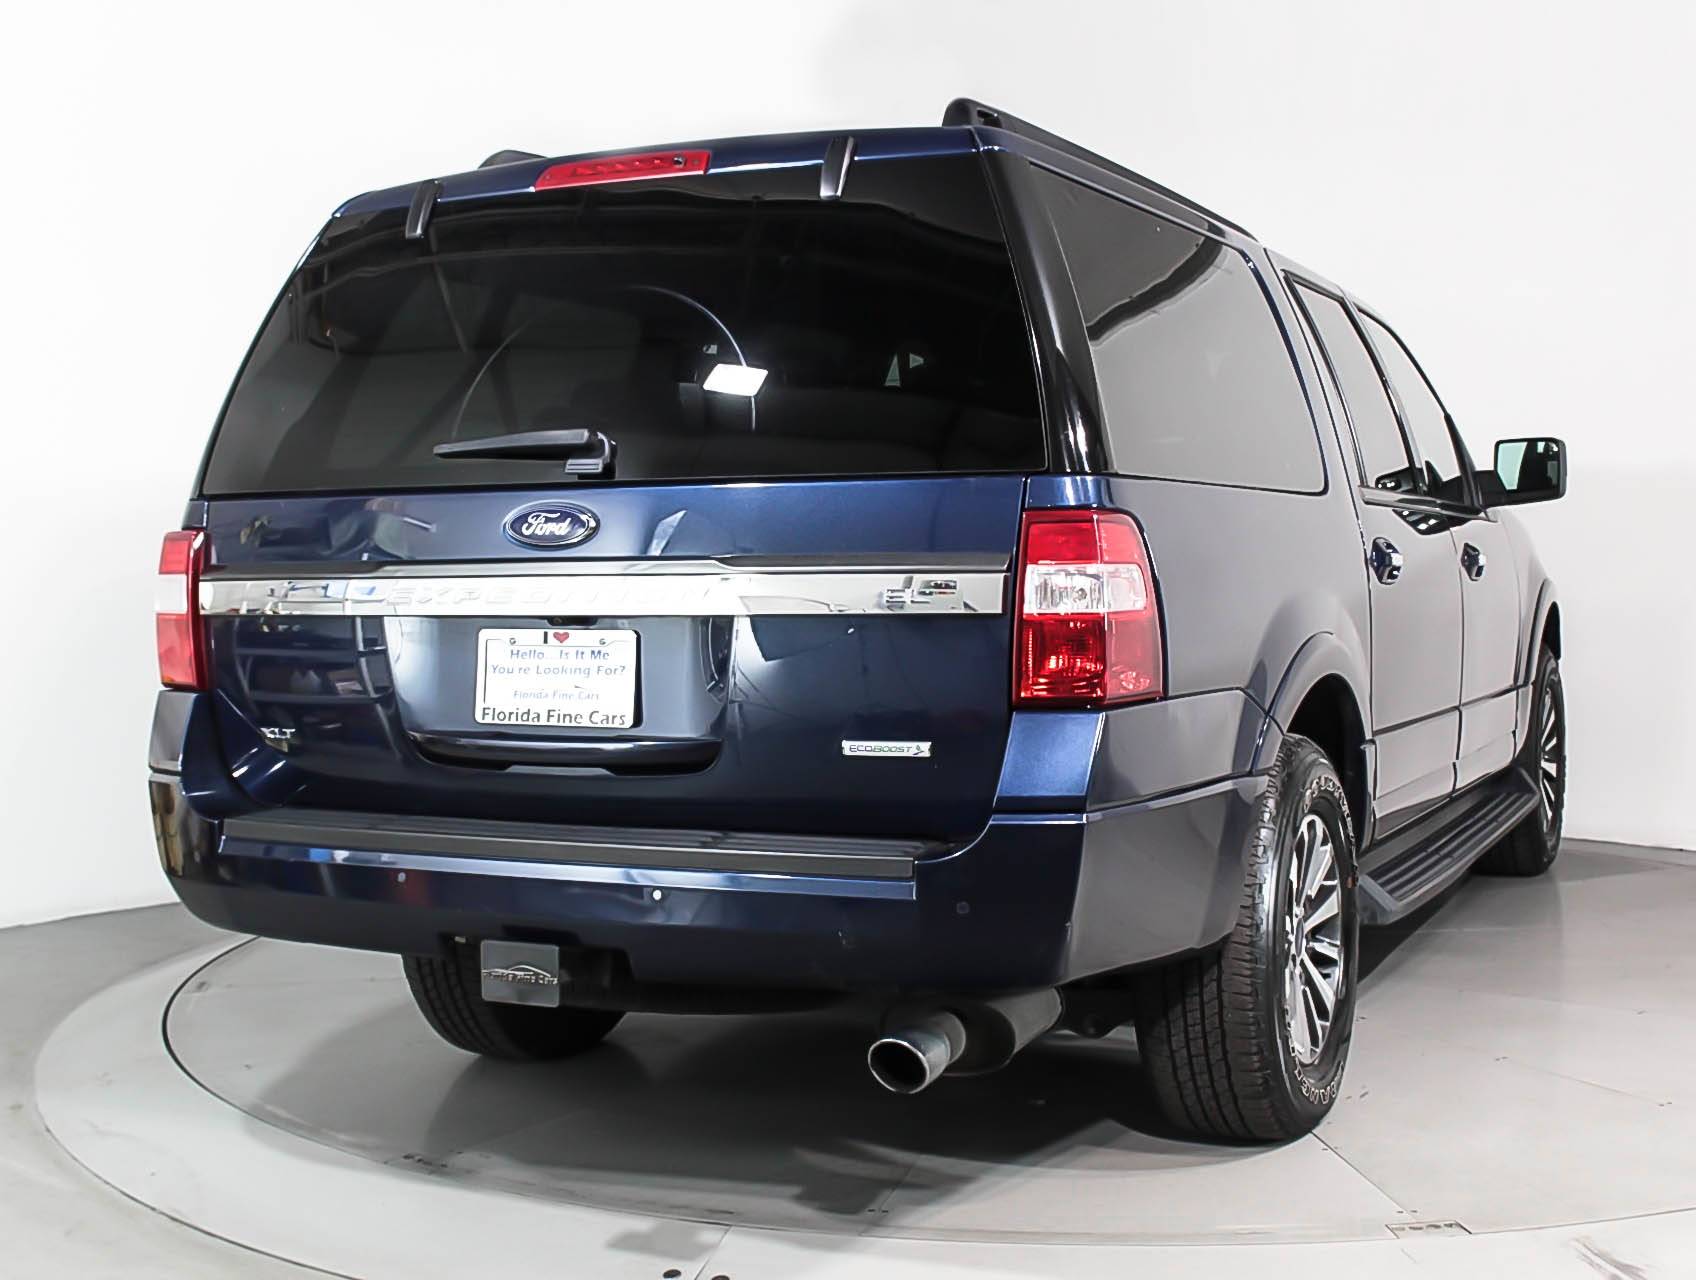 Florida Fine Cars - Used FORD EXPEDITION EL 2016 MIAMI Xlt